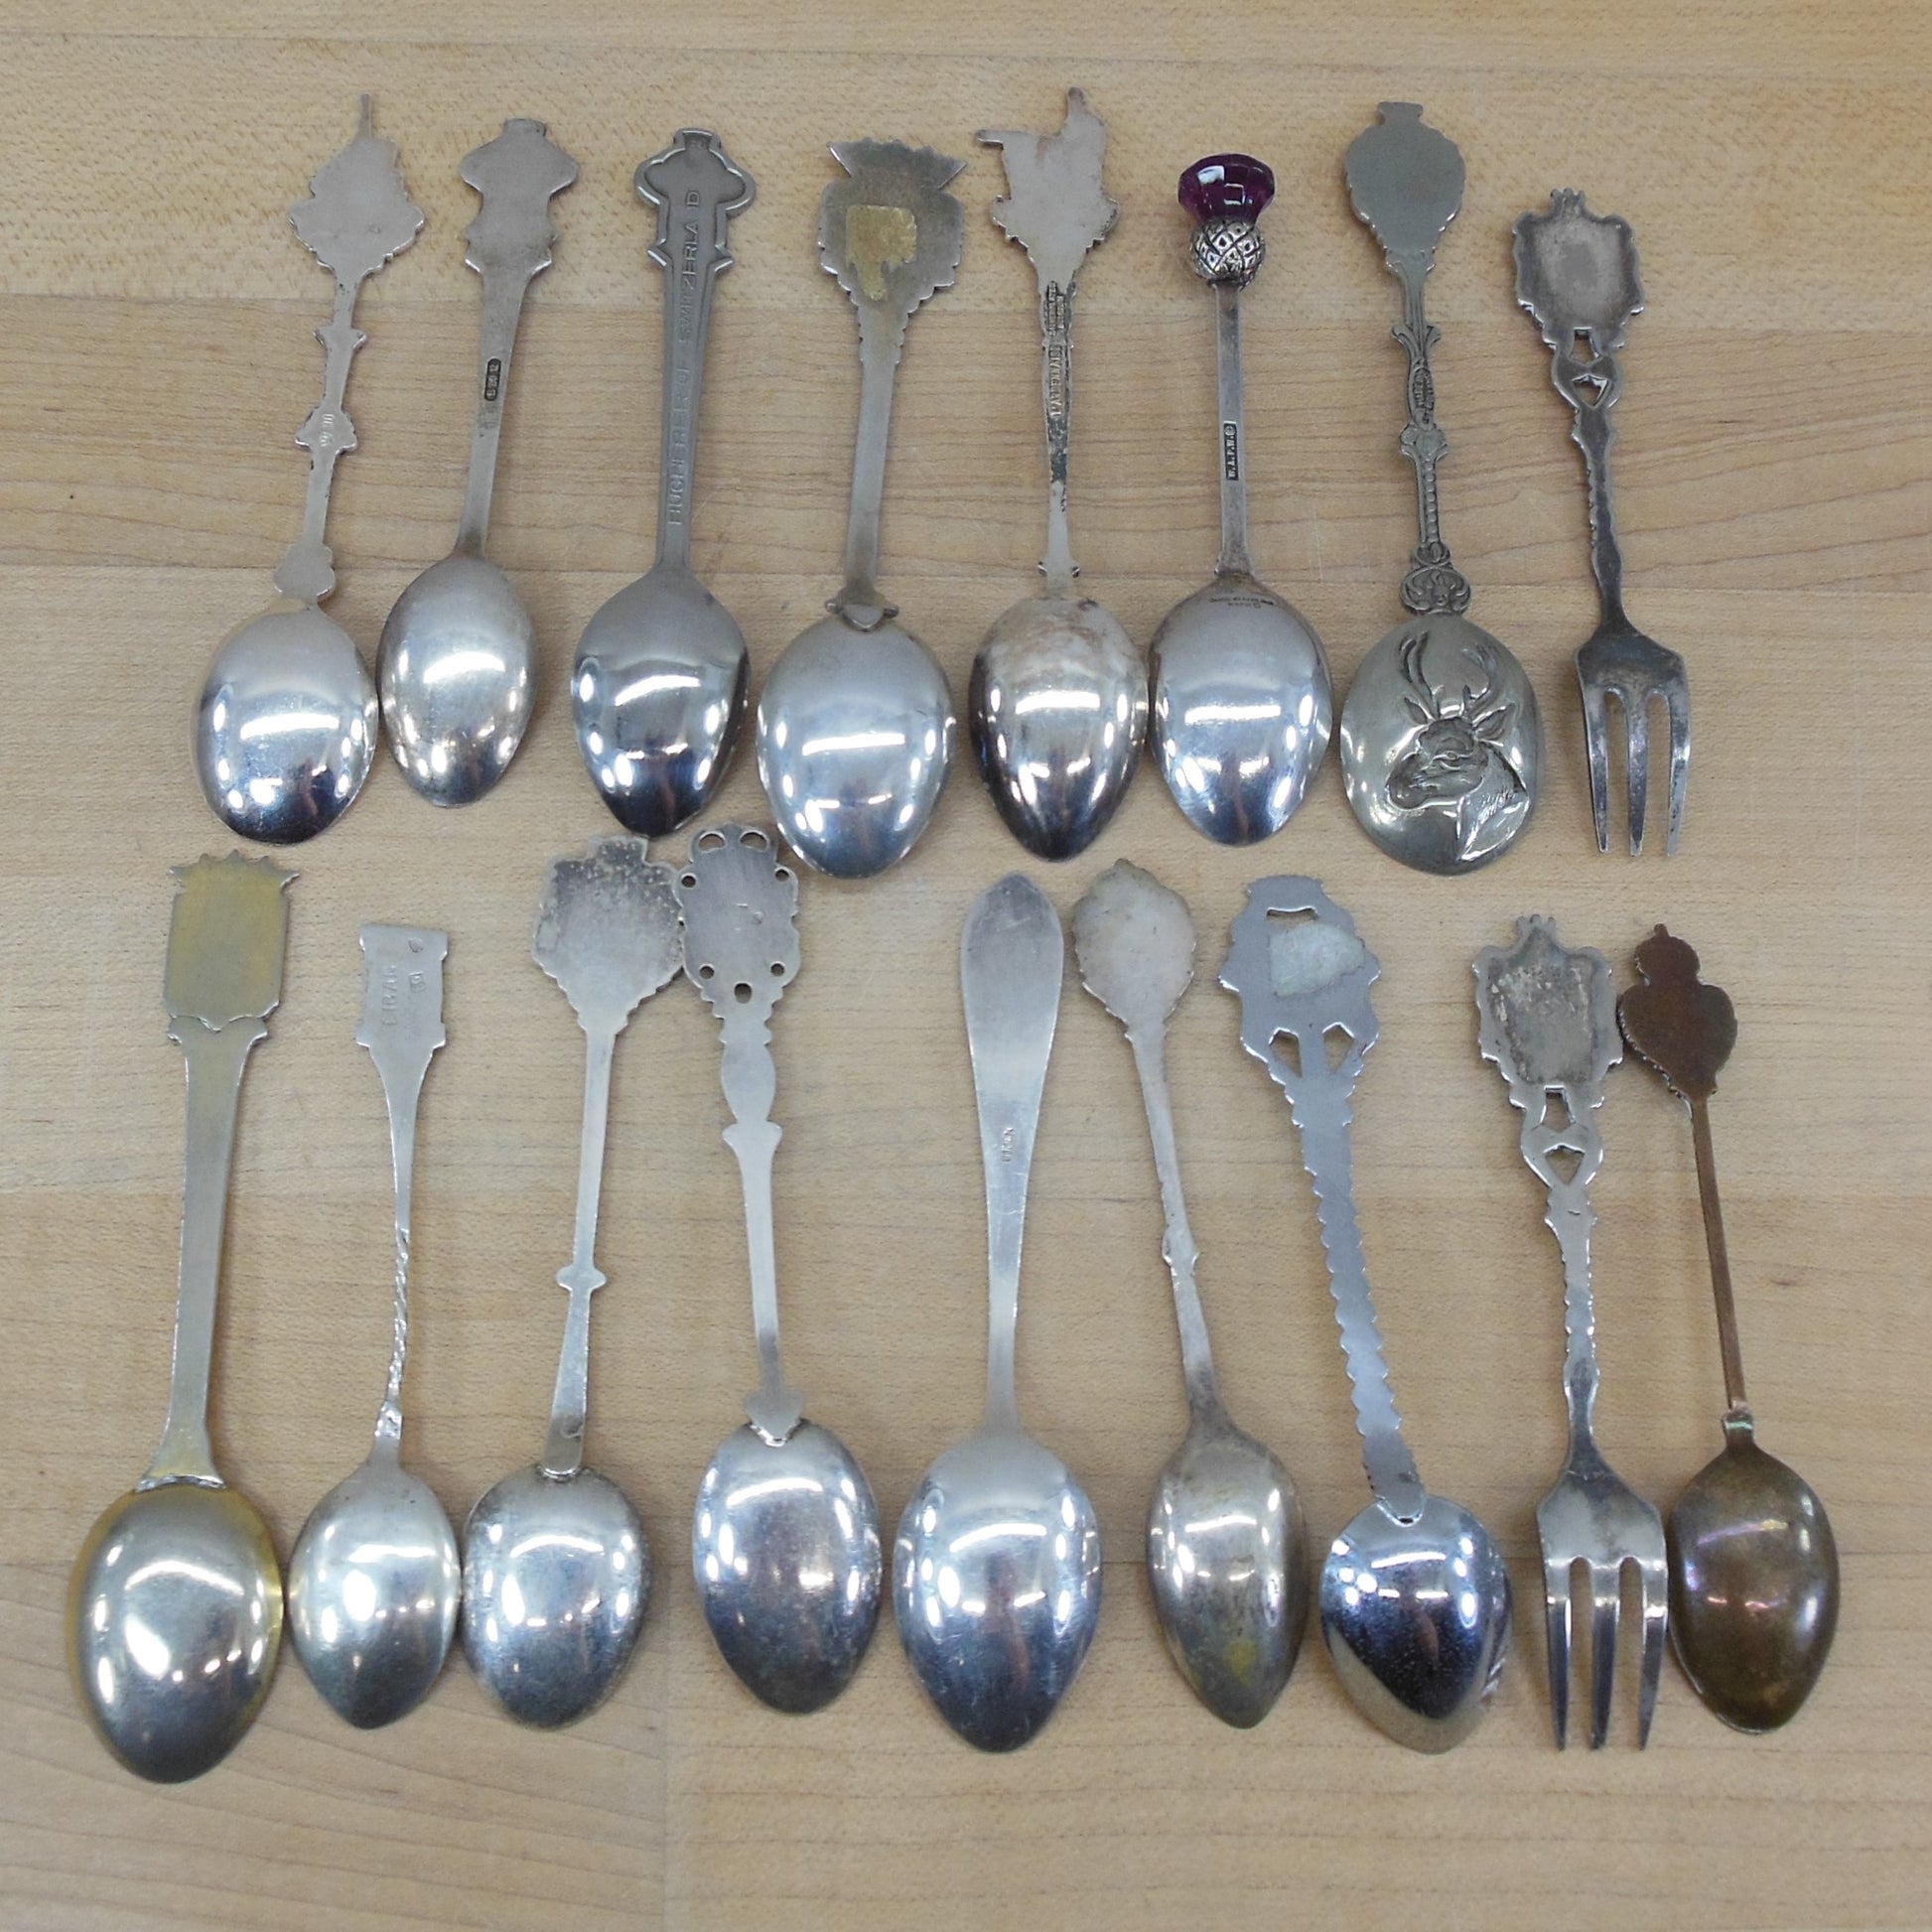 Souvenir Spoon 17 Lot Silverplate & Unmarked - Countries Rolex Etc. vintage used